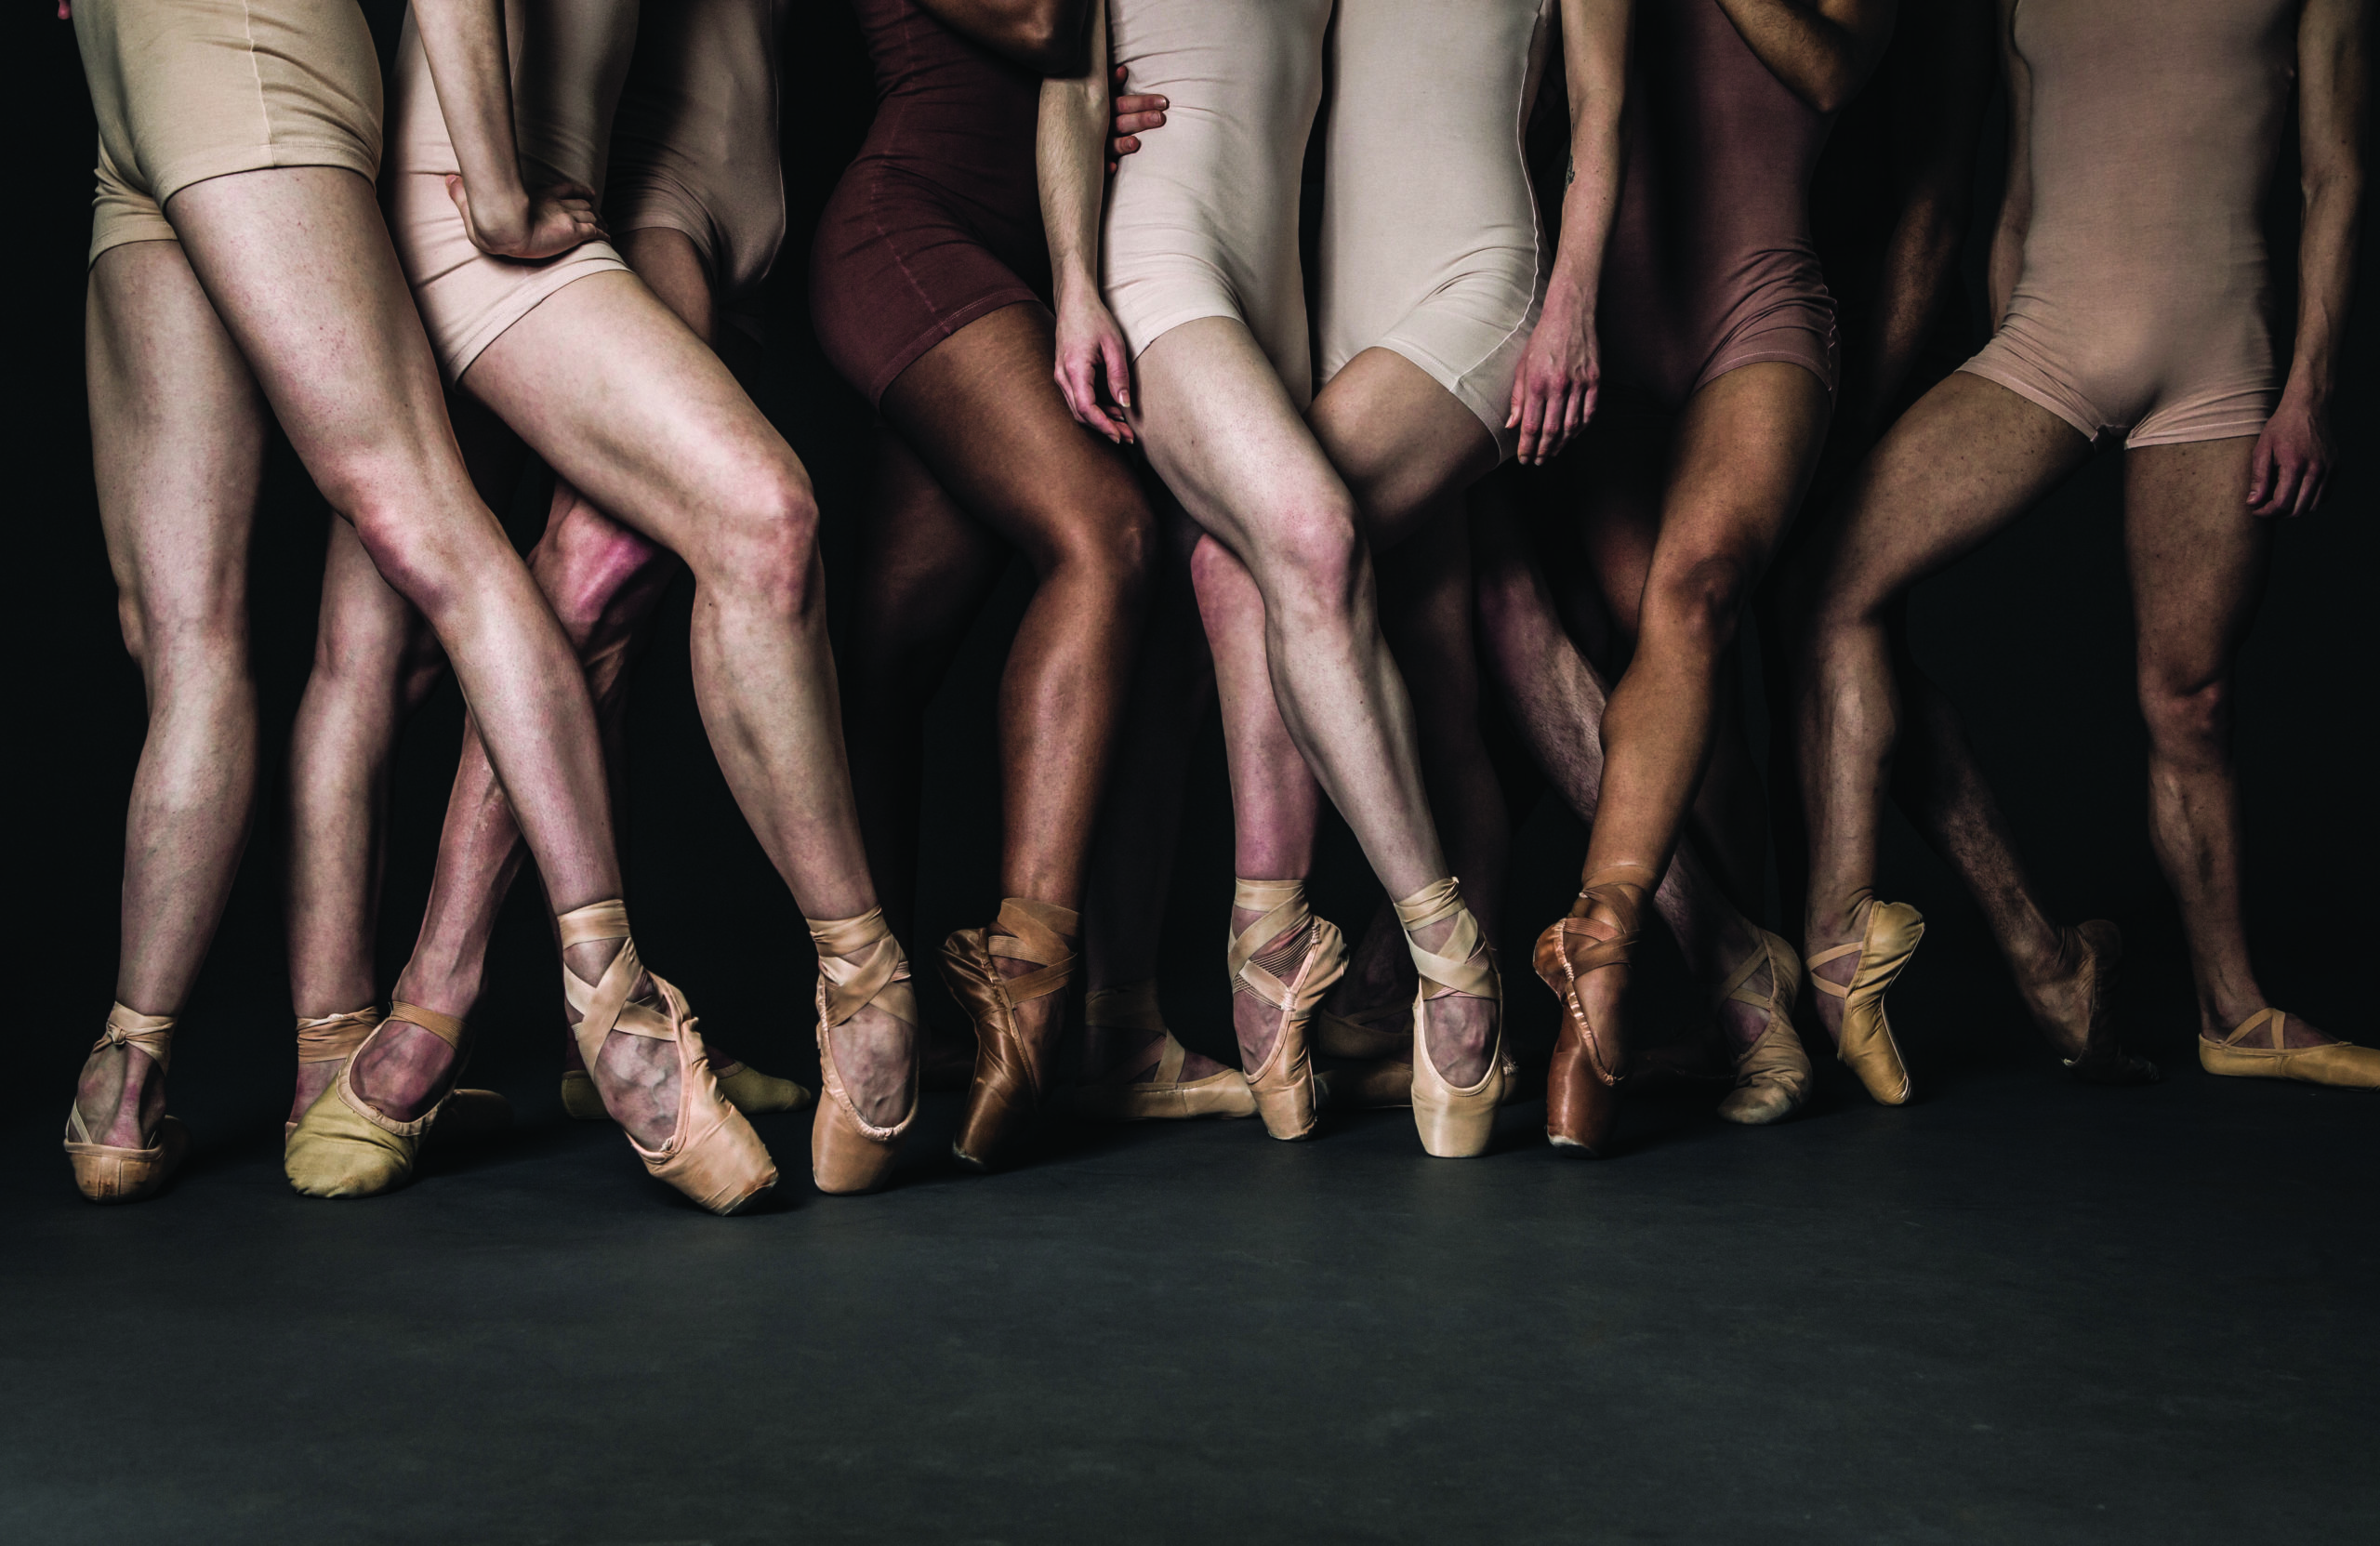 A cluster of dancers with a variety of skin tones are shown from the waist down. All wear biketards close to their skin tones and pointe shoes dyed to match.